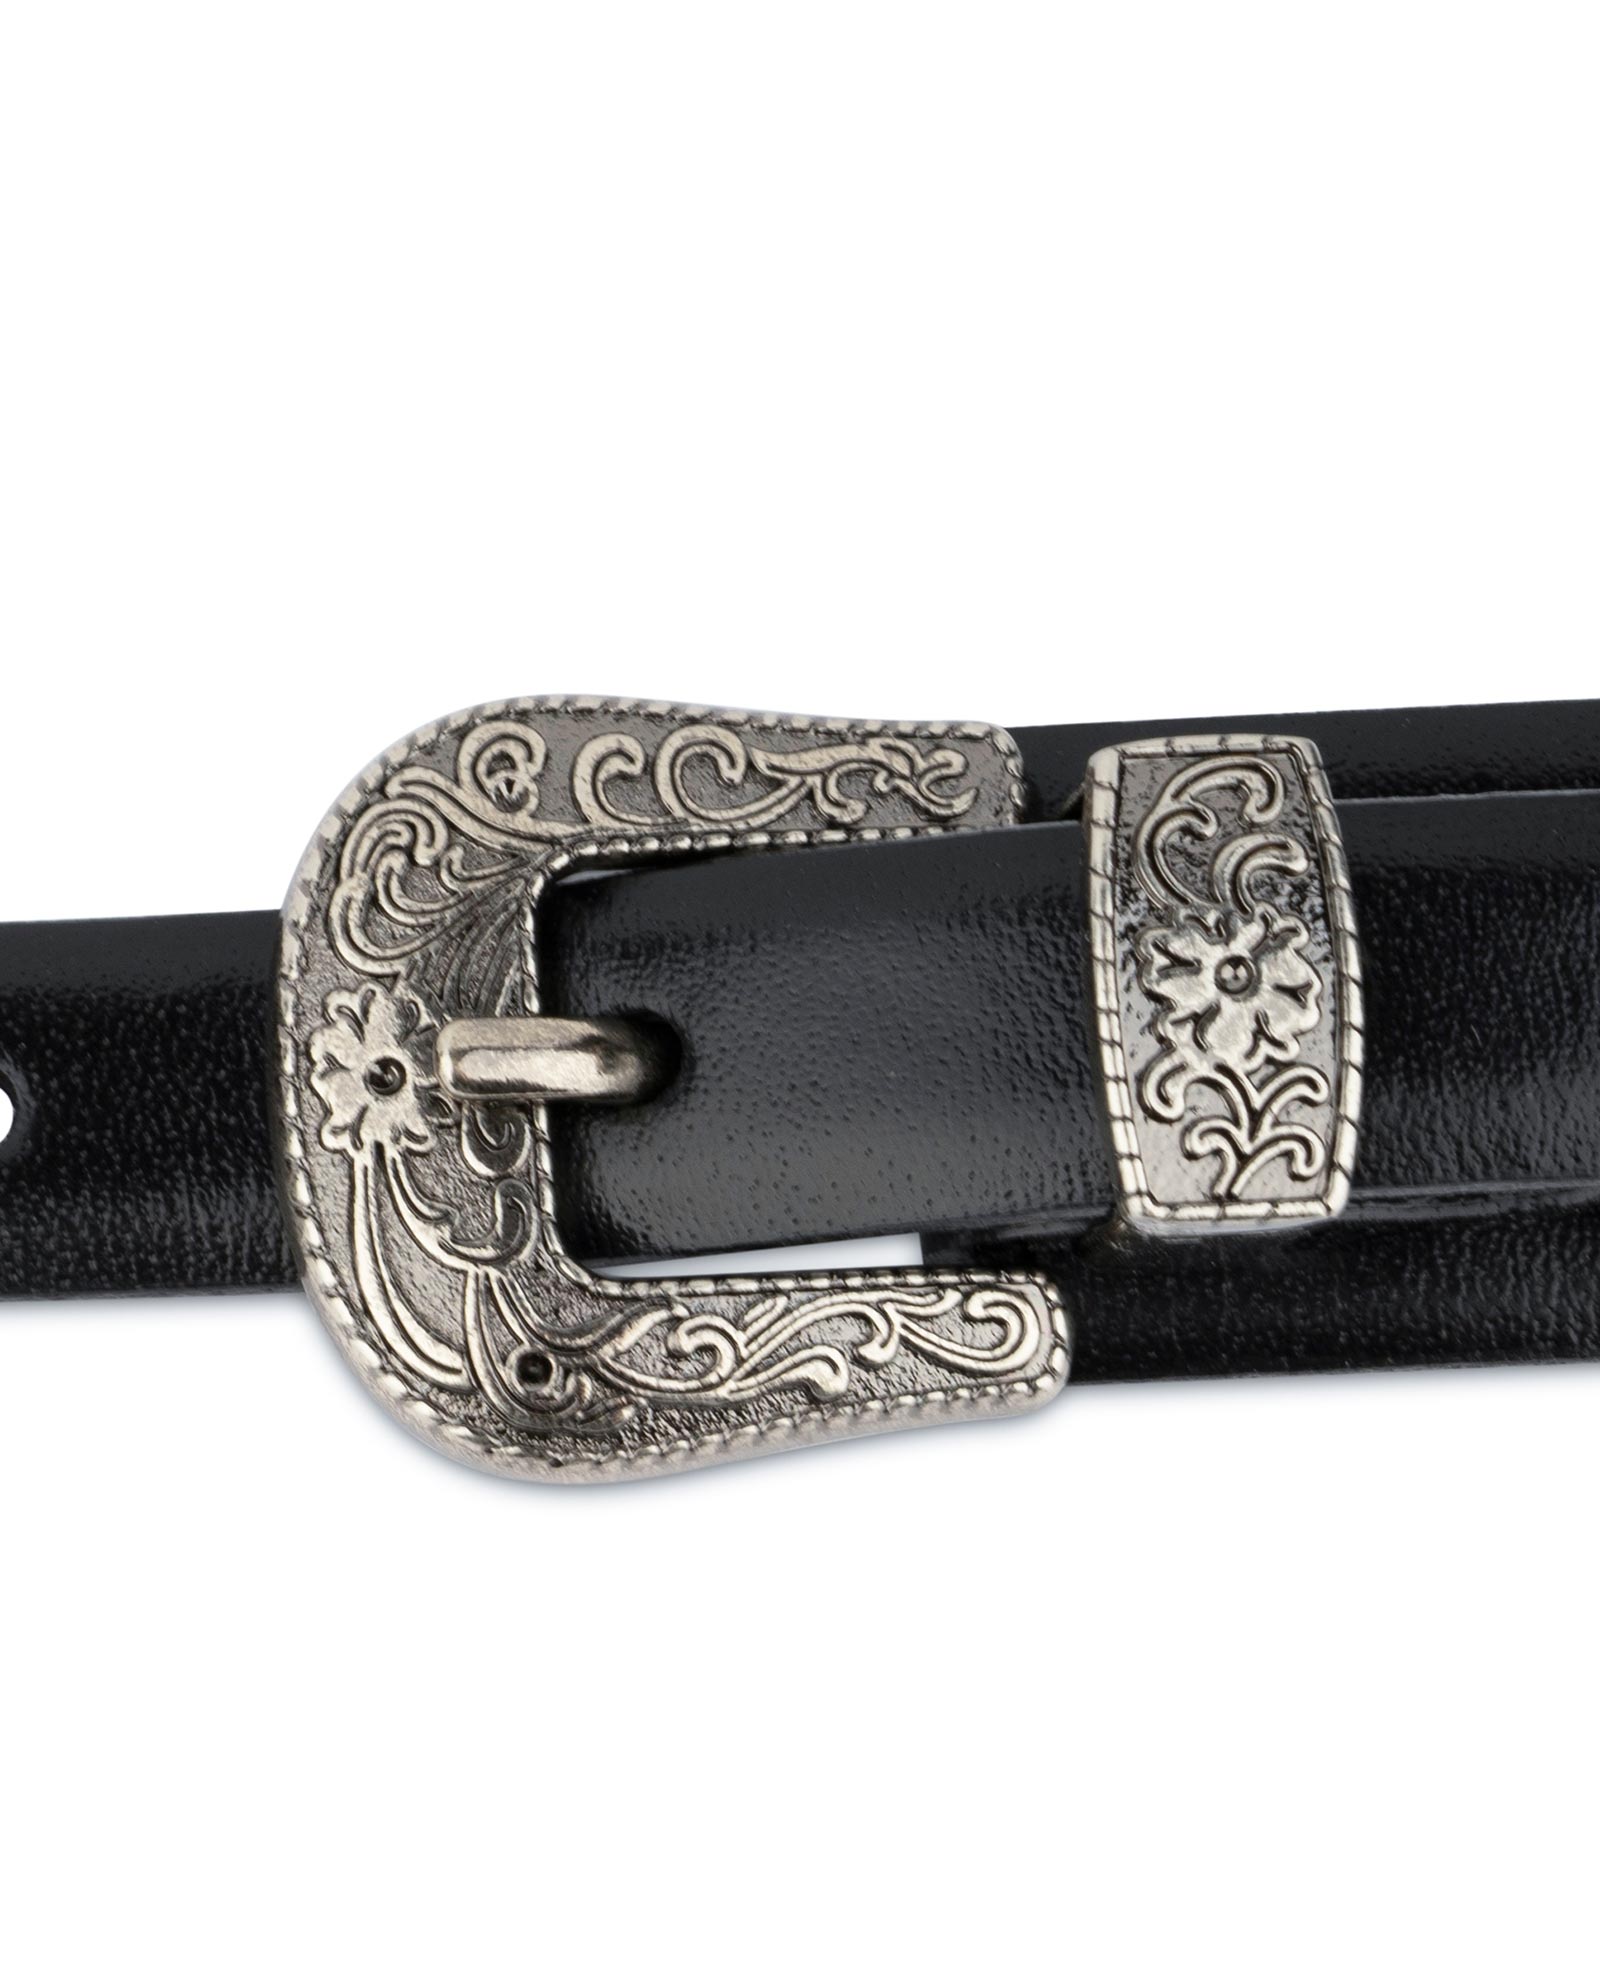 Buy Western belt With Double Buckle - Leather Belts Online com